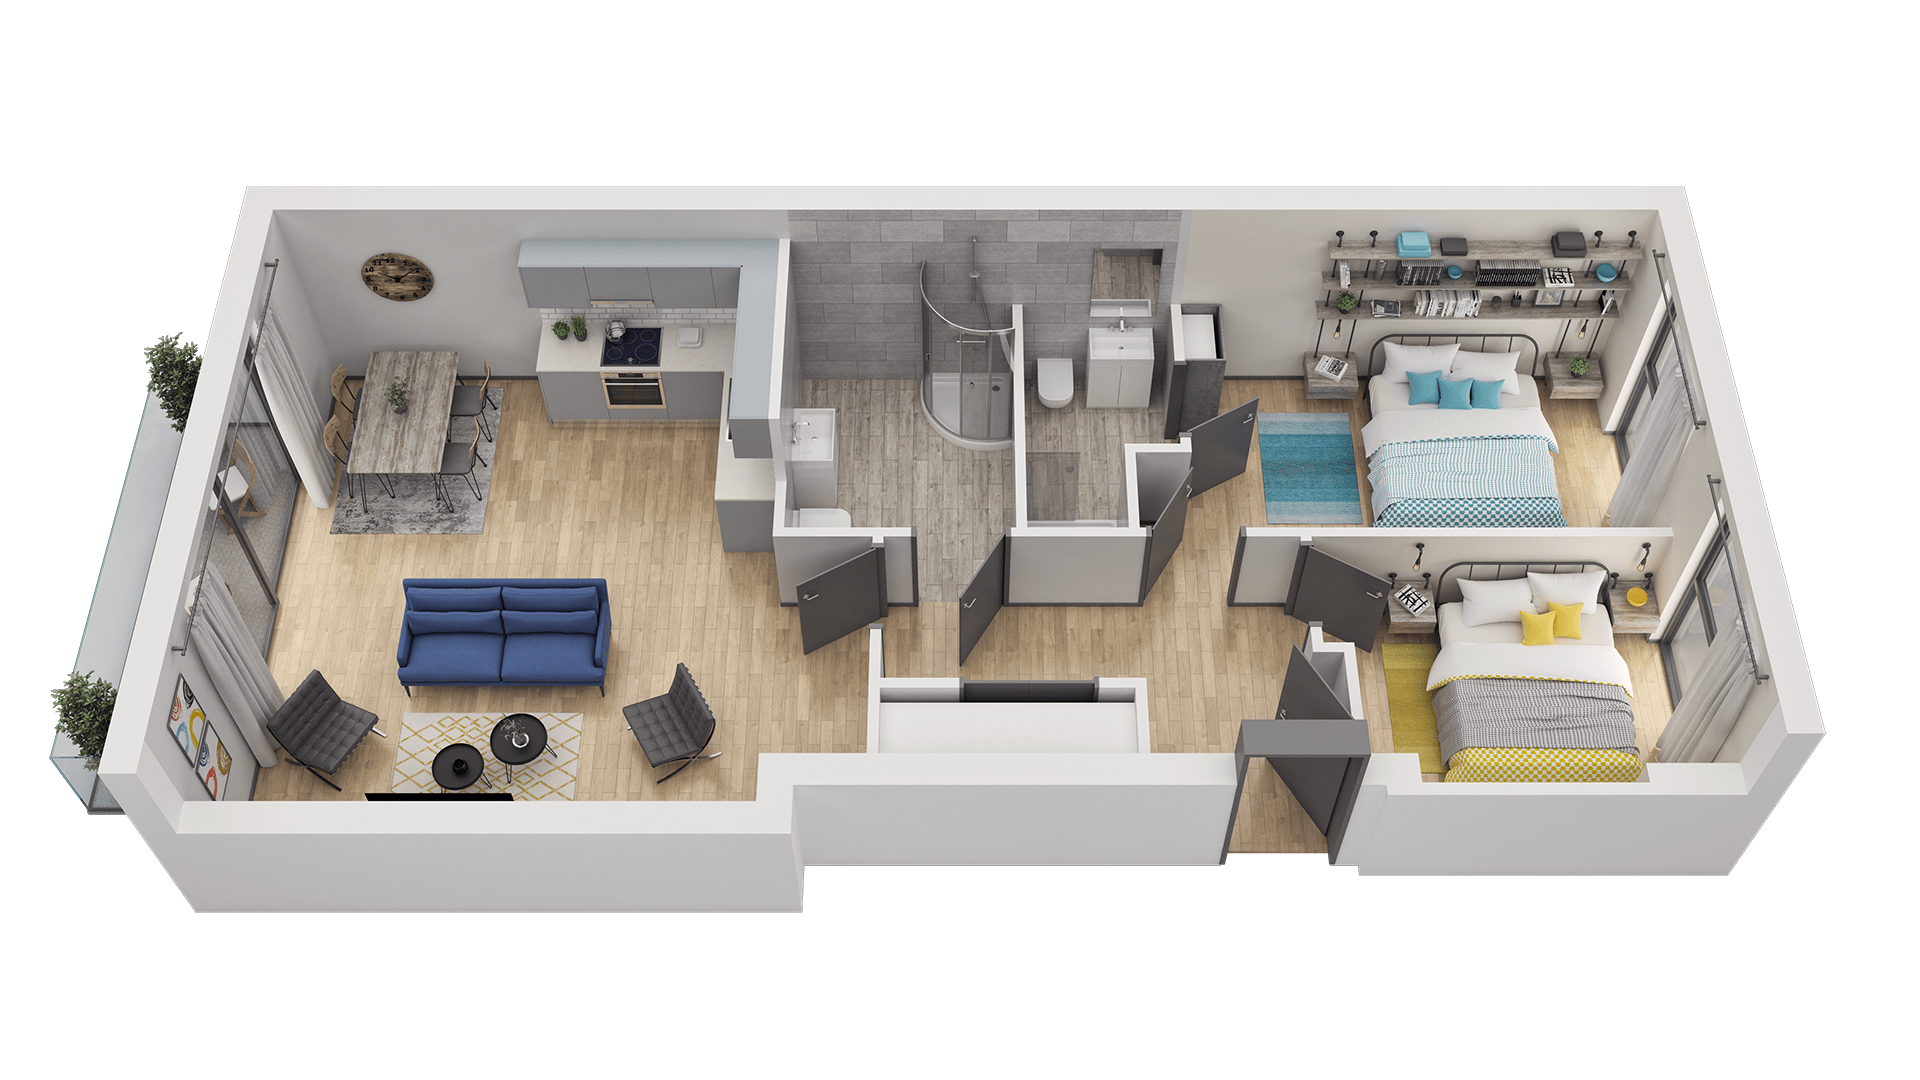 A detailed 3D floor plan to convey an apartment layout